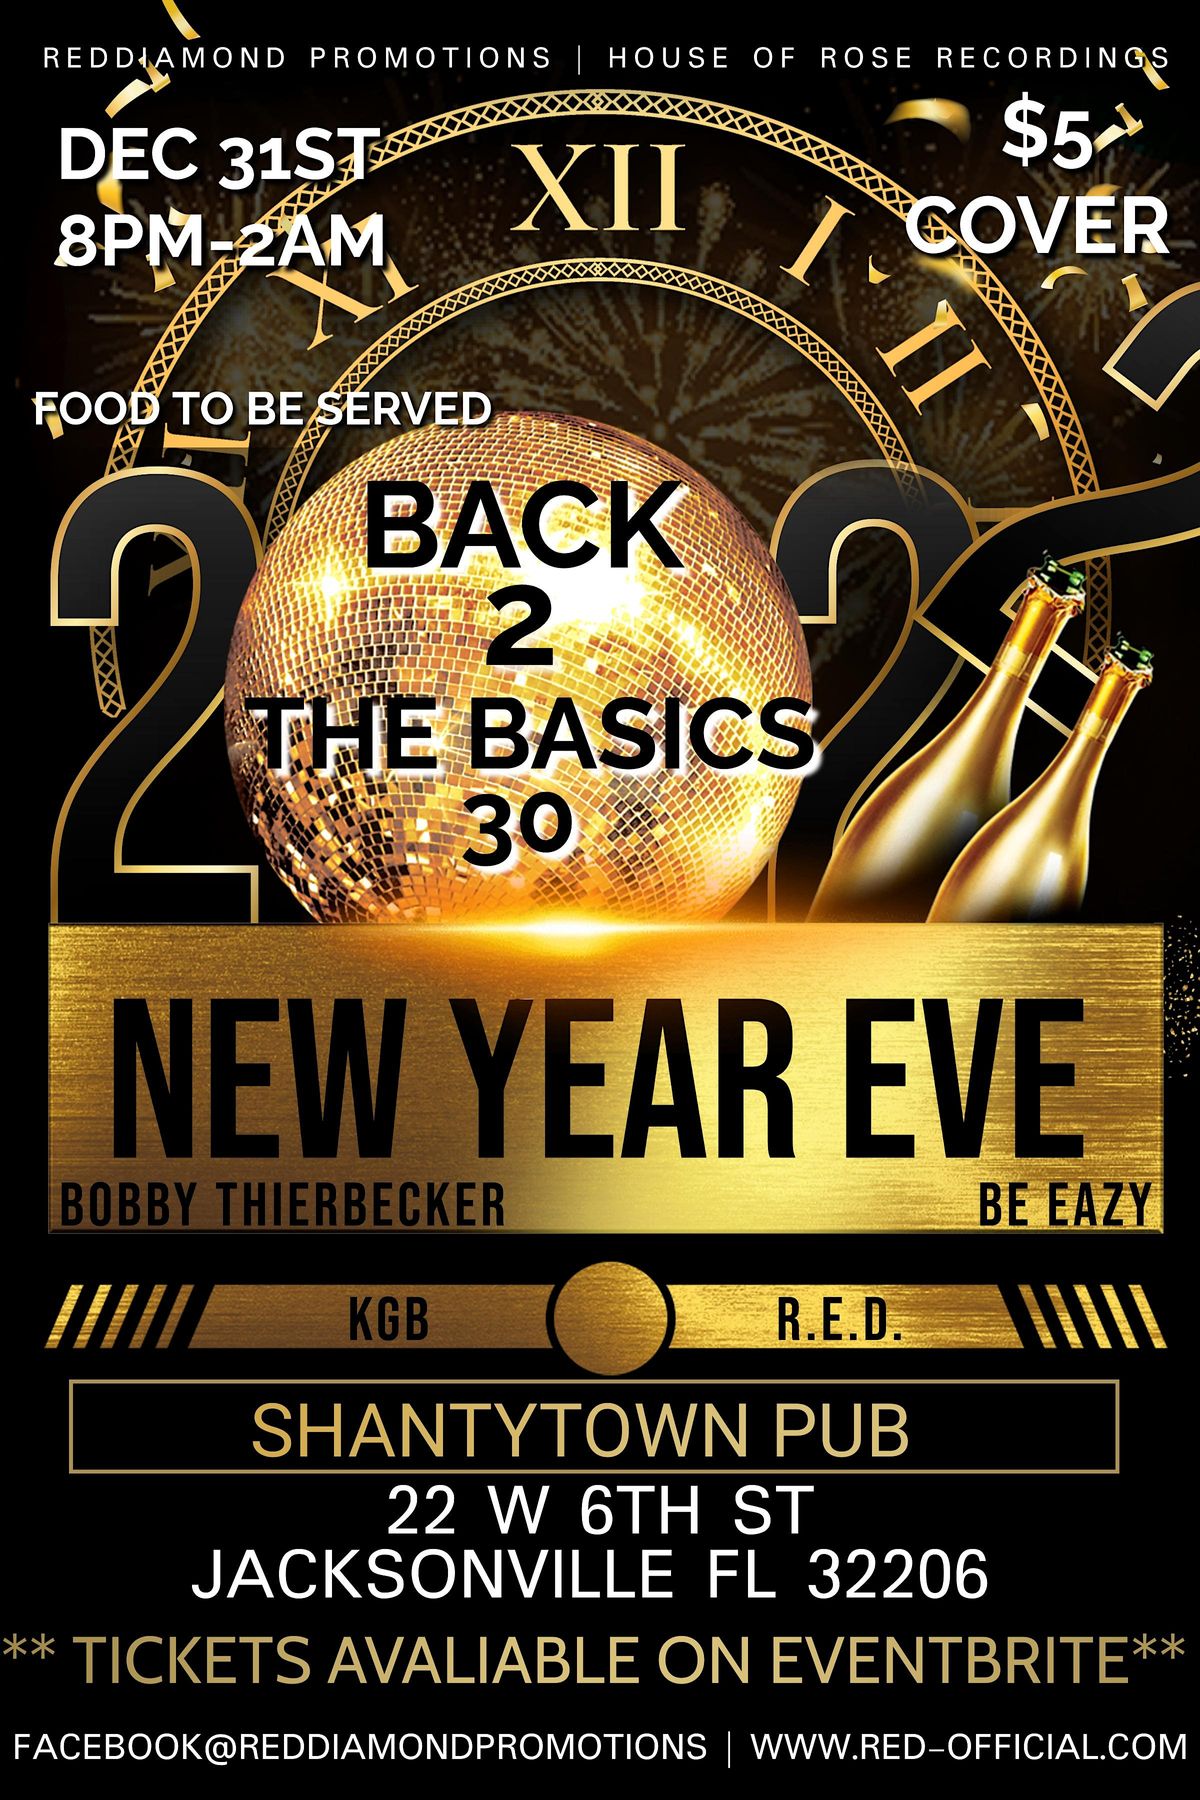 BACK 2 THE BASICS 30 THE NEW YEARS EVE ADDITION